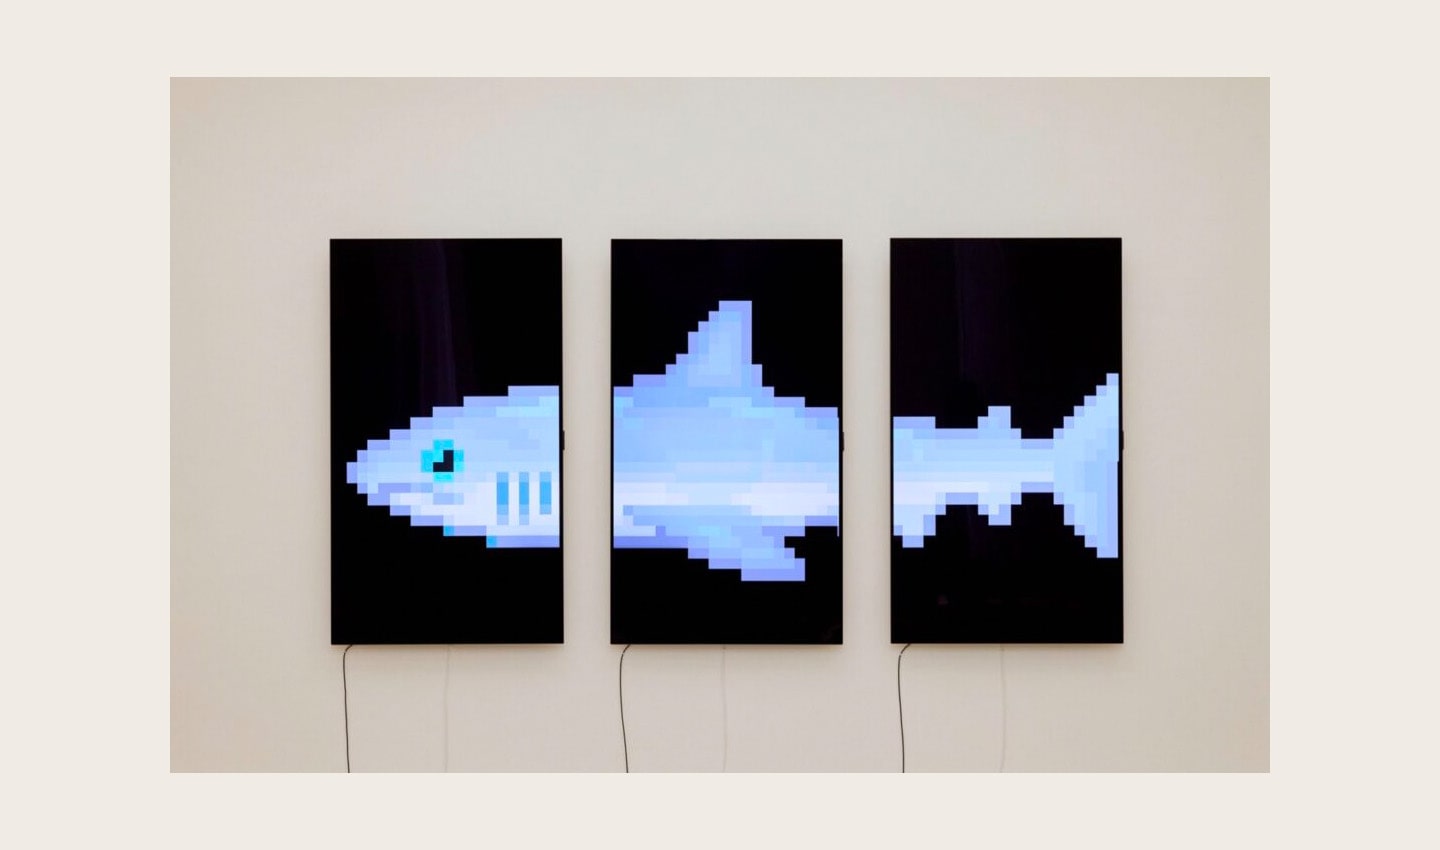 ‘THE S/H/A/R/K’ by Damien Hirst displayed on LG OLED TV at Saatchi Gallery